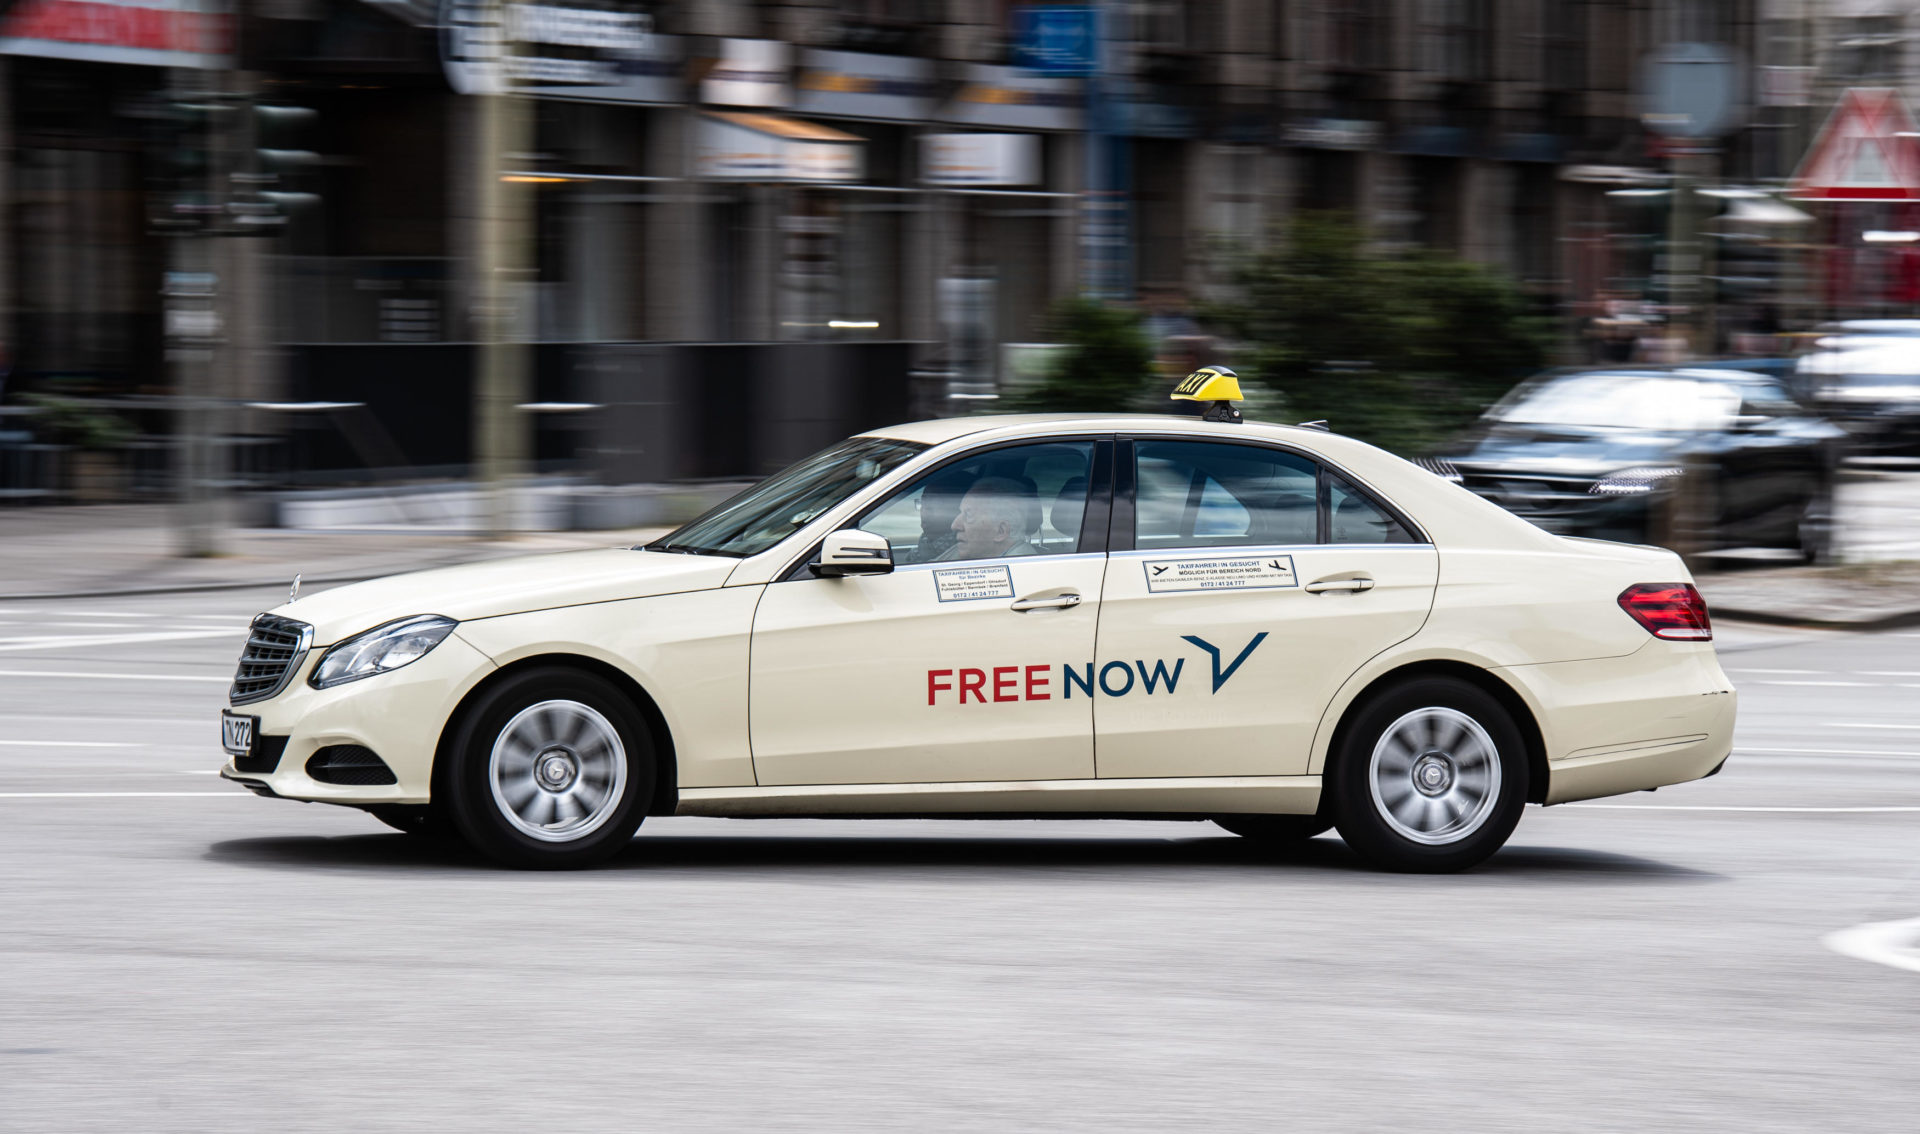 A FreeNow taxi in Germany. Image: Alamy Stock Photo